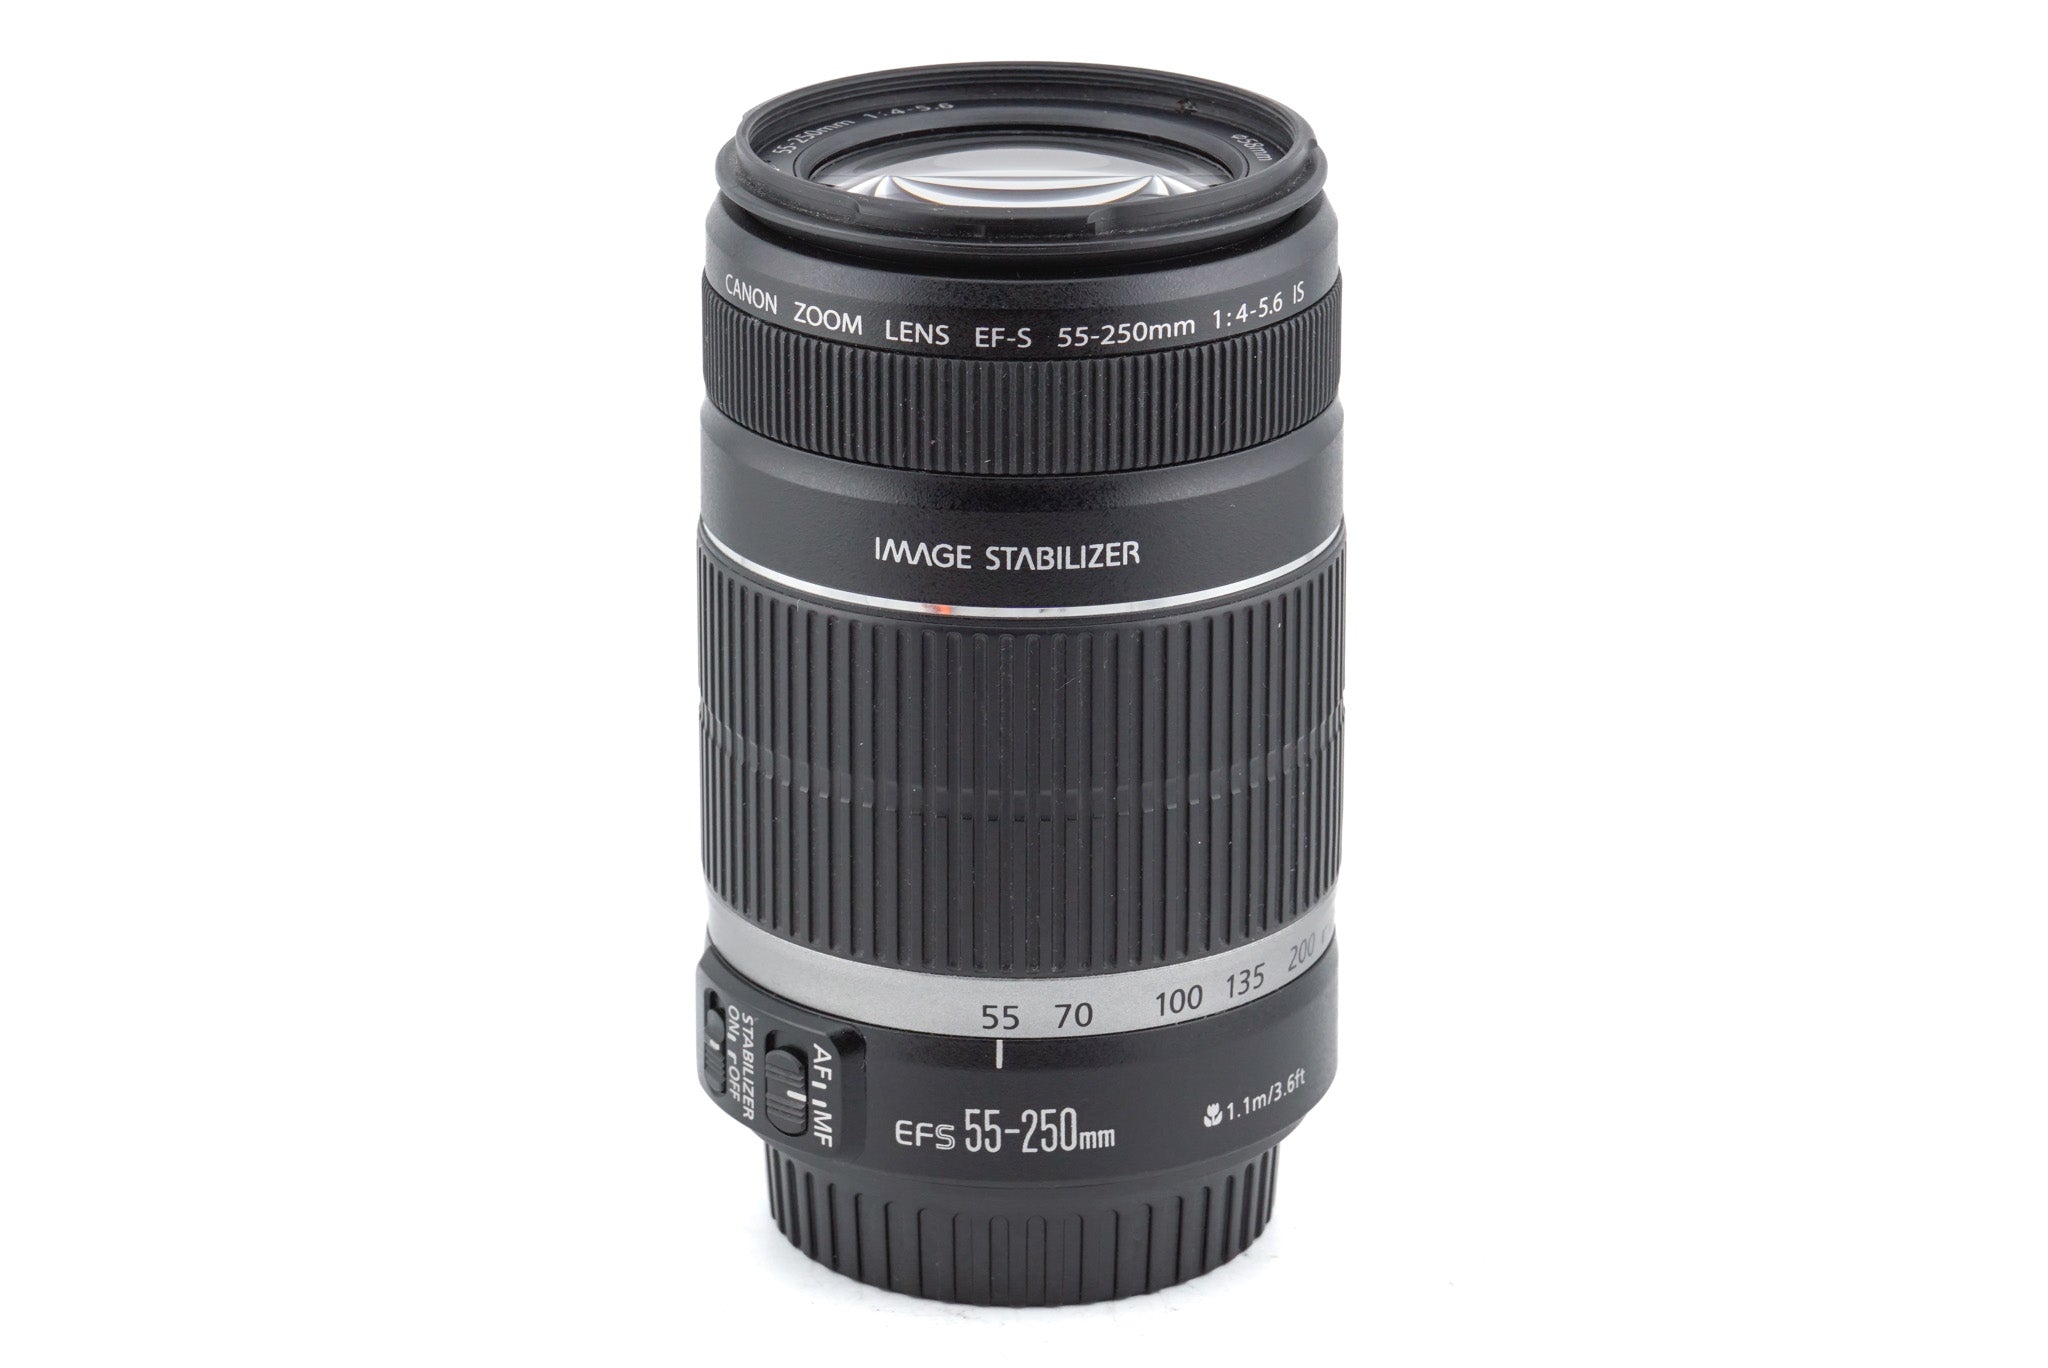 CANON ZOOM LENS EF-S 55㎜-250㎜ 1:4-5.6 IS - レンズ(ズーム)